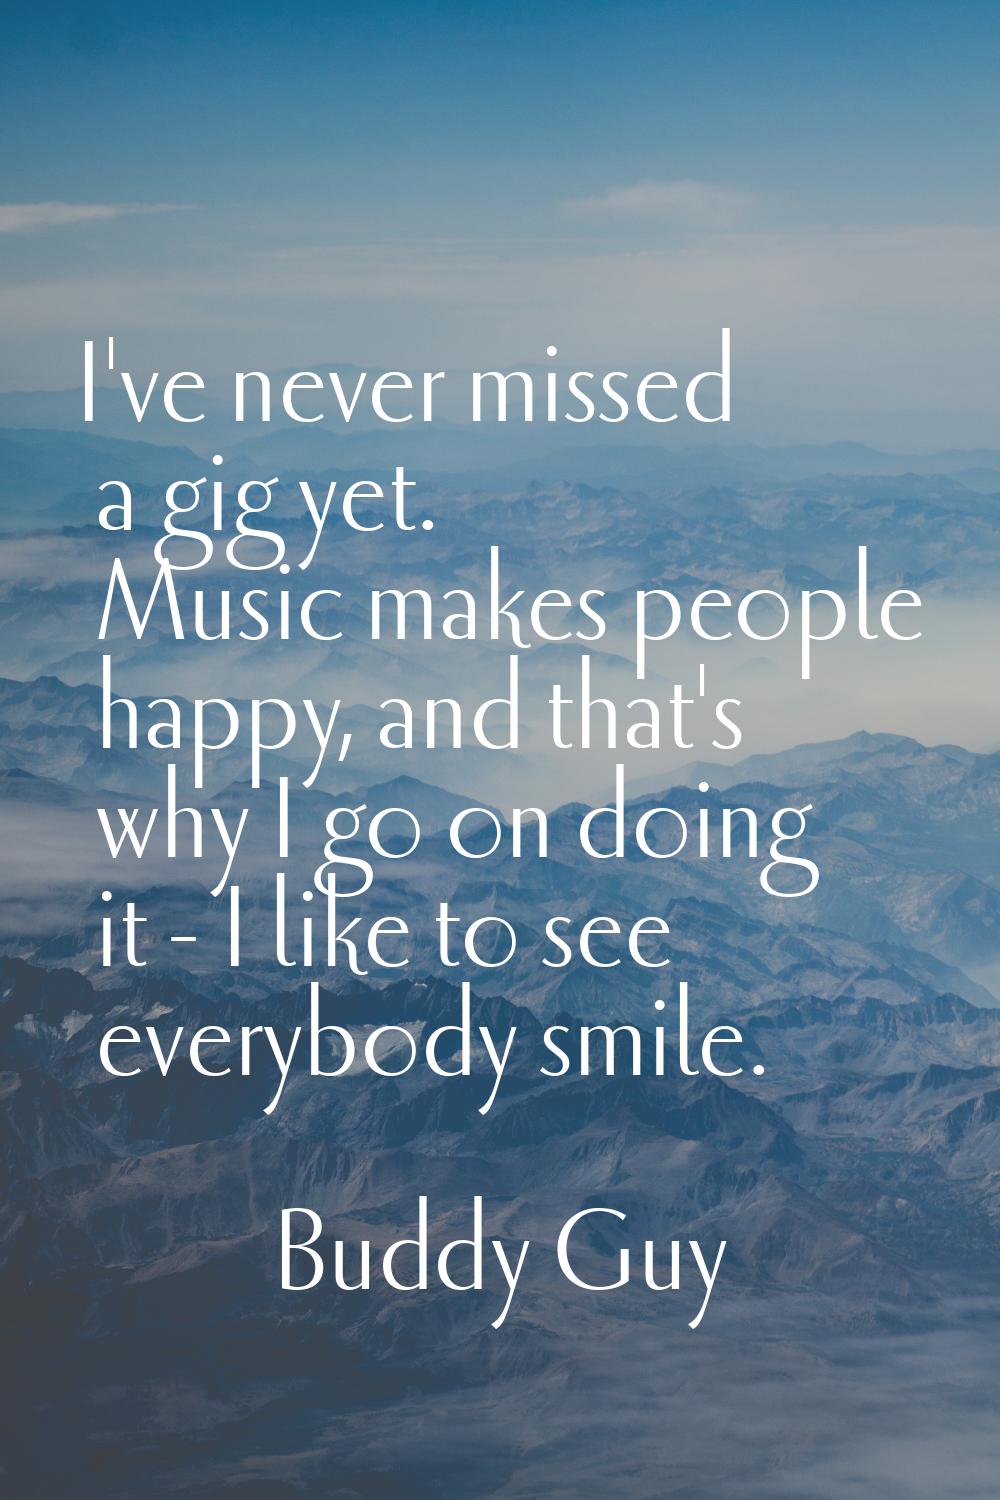 I've never missed a gig yet. Music makes people happy, and that's why I go on doing it - I like to 